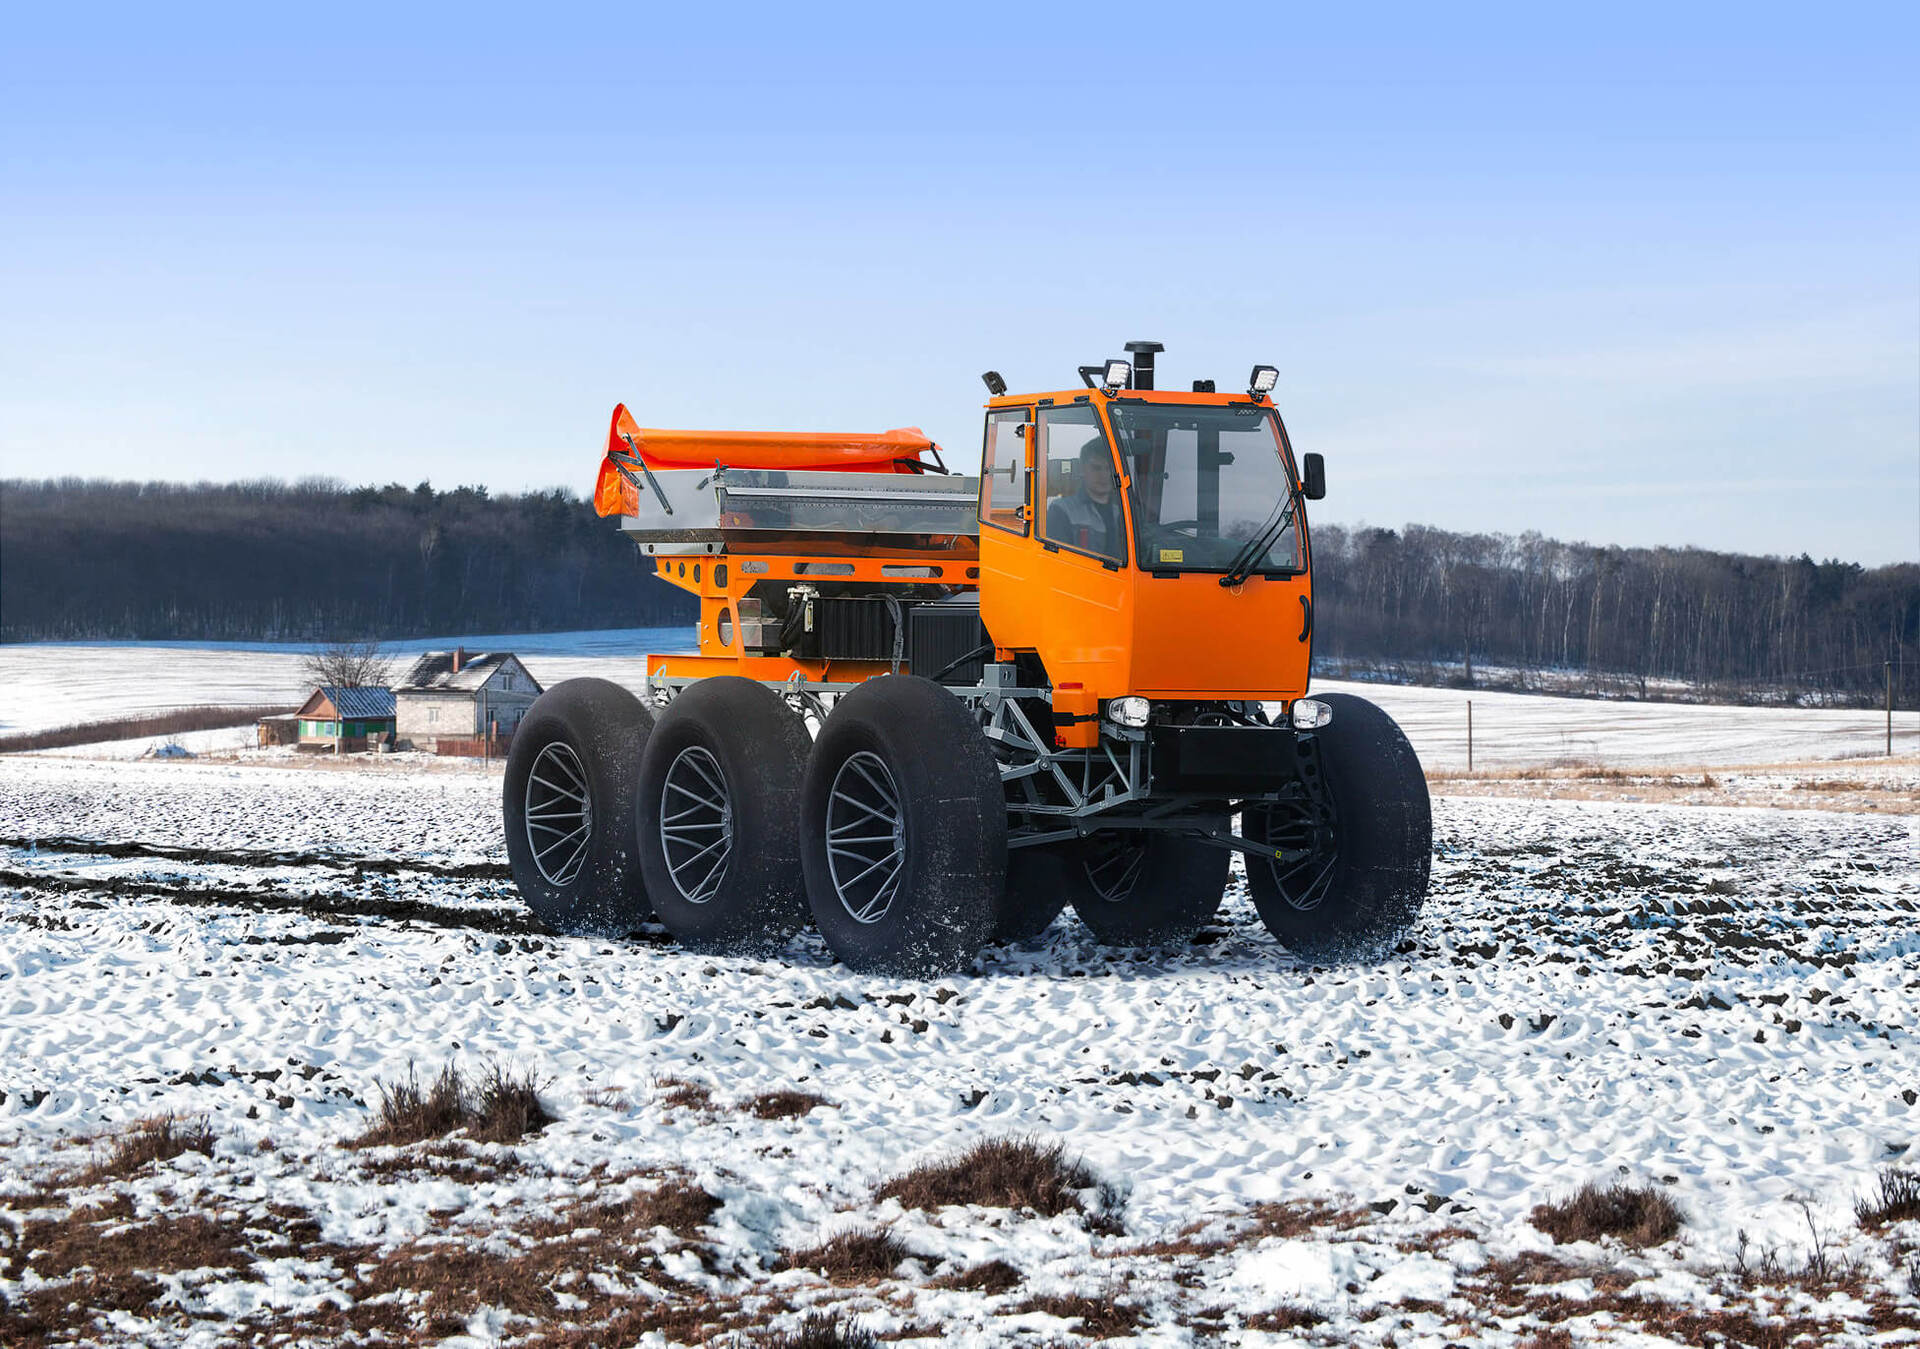 Agricultural Machinery of the “Tuman” line. They go out into the field, even when there is snow